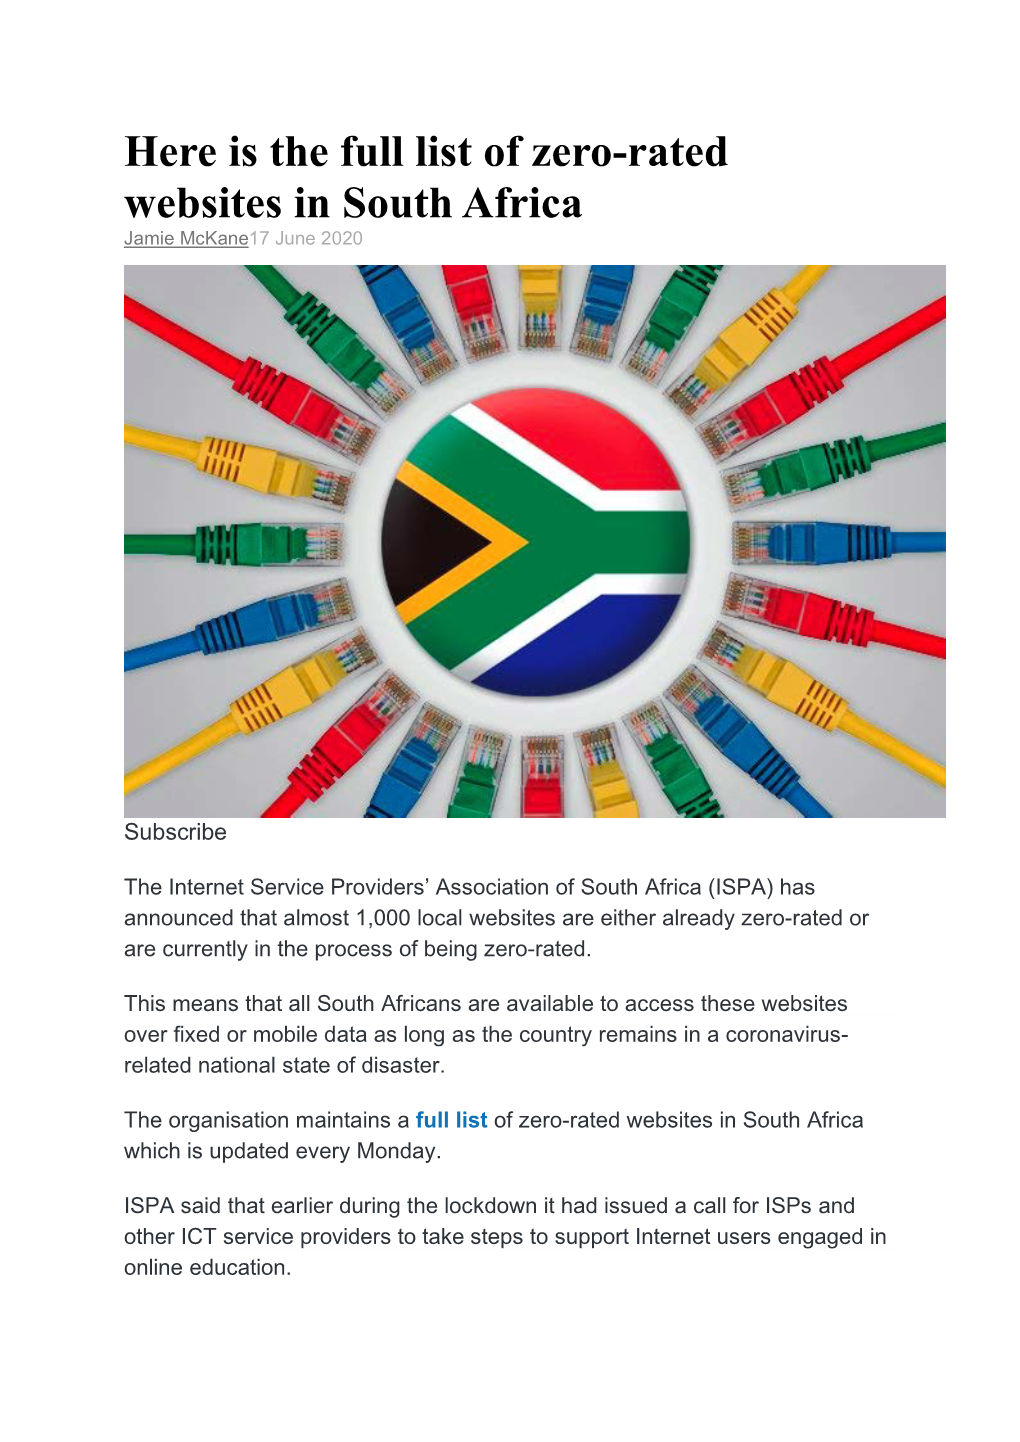 Here Is the Full List of Zero-Rated Websites in South Africa Jamie Mckane17 June 2020